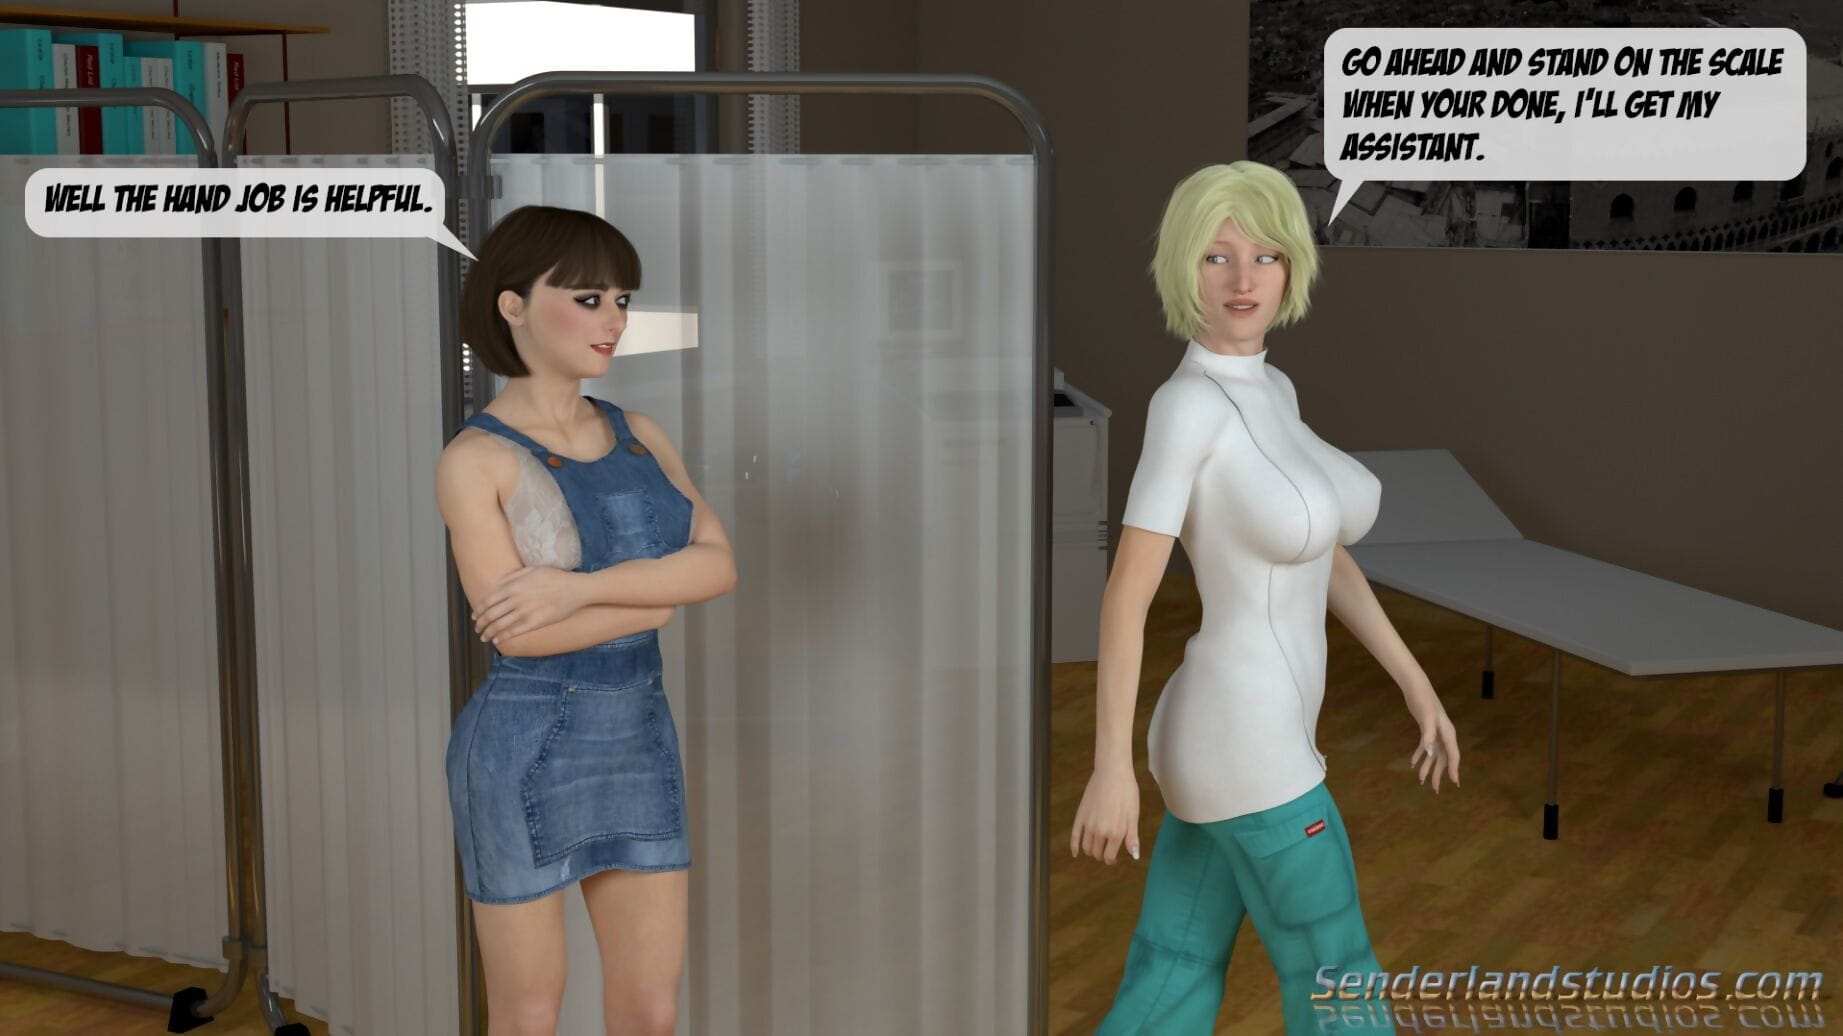 Senderland Studios – New Day part 2 – Doctors Office page 1